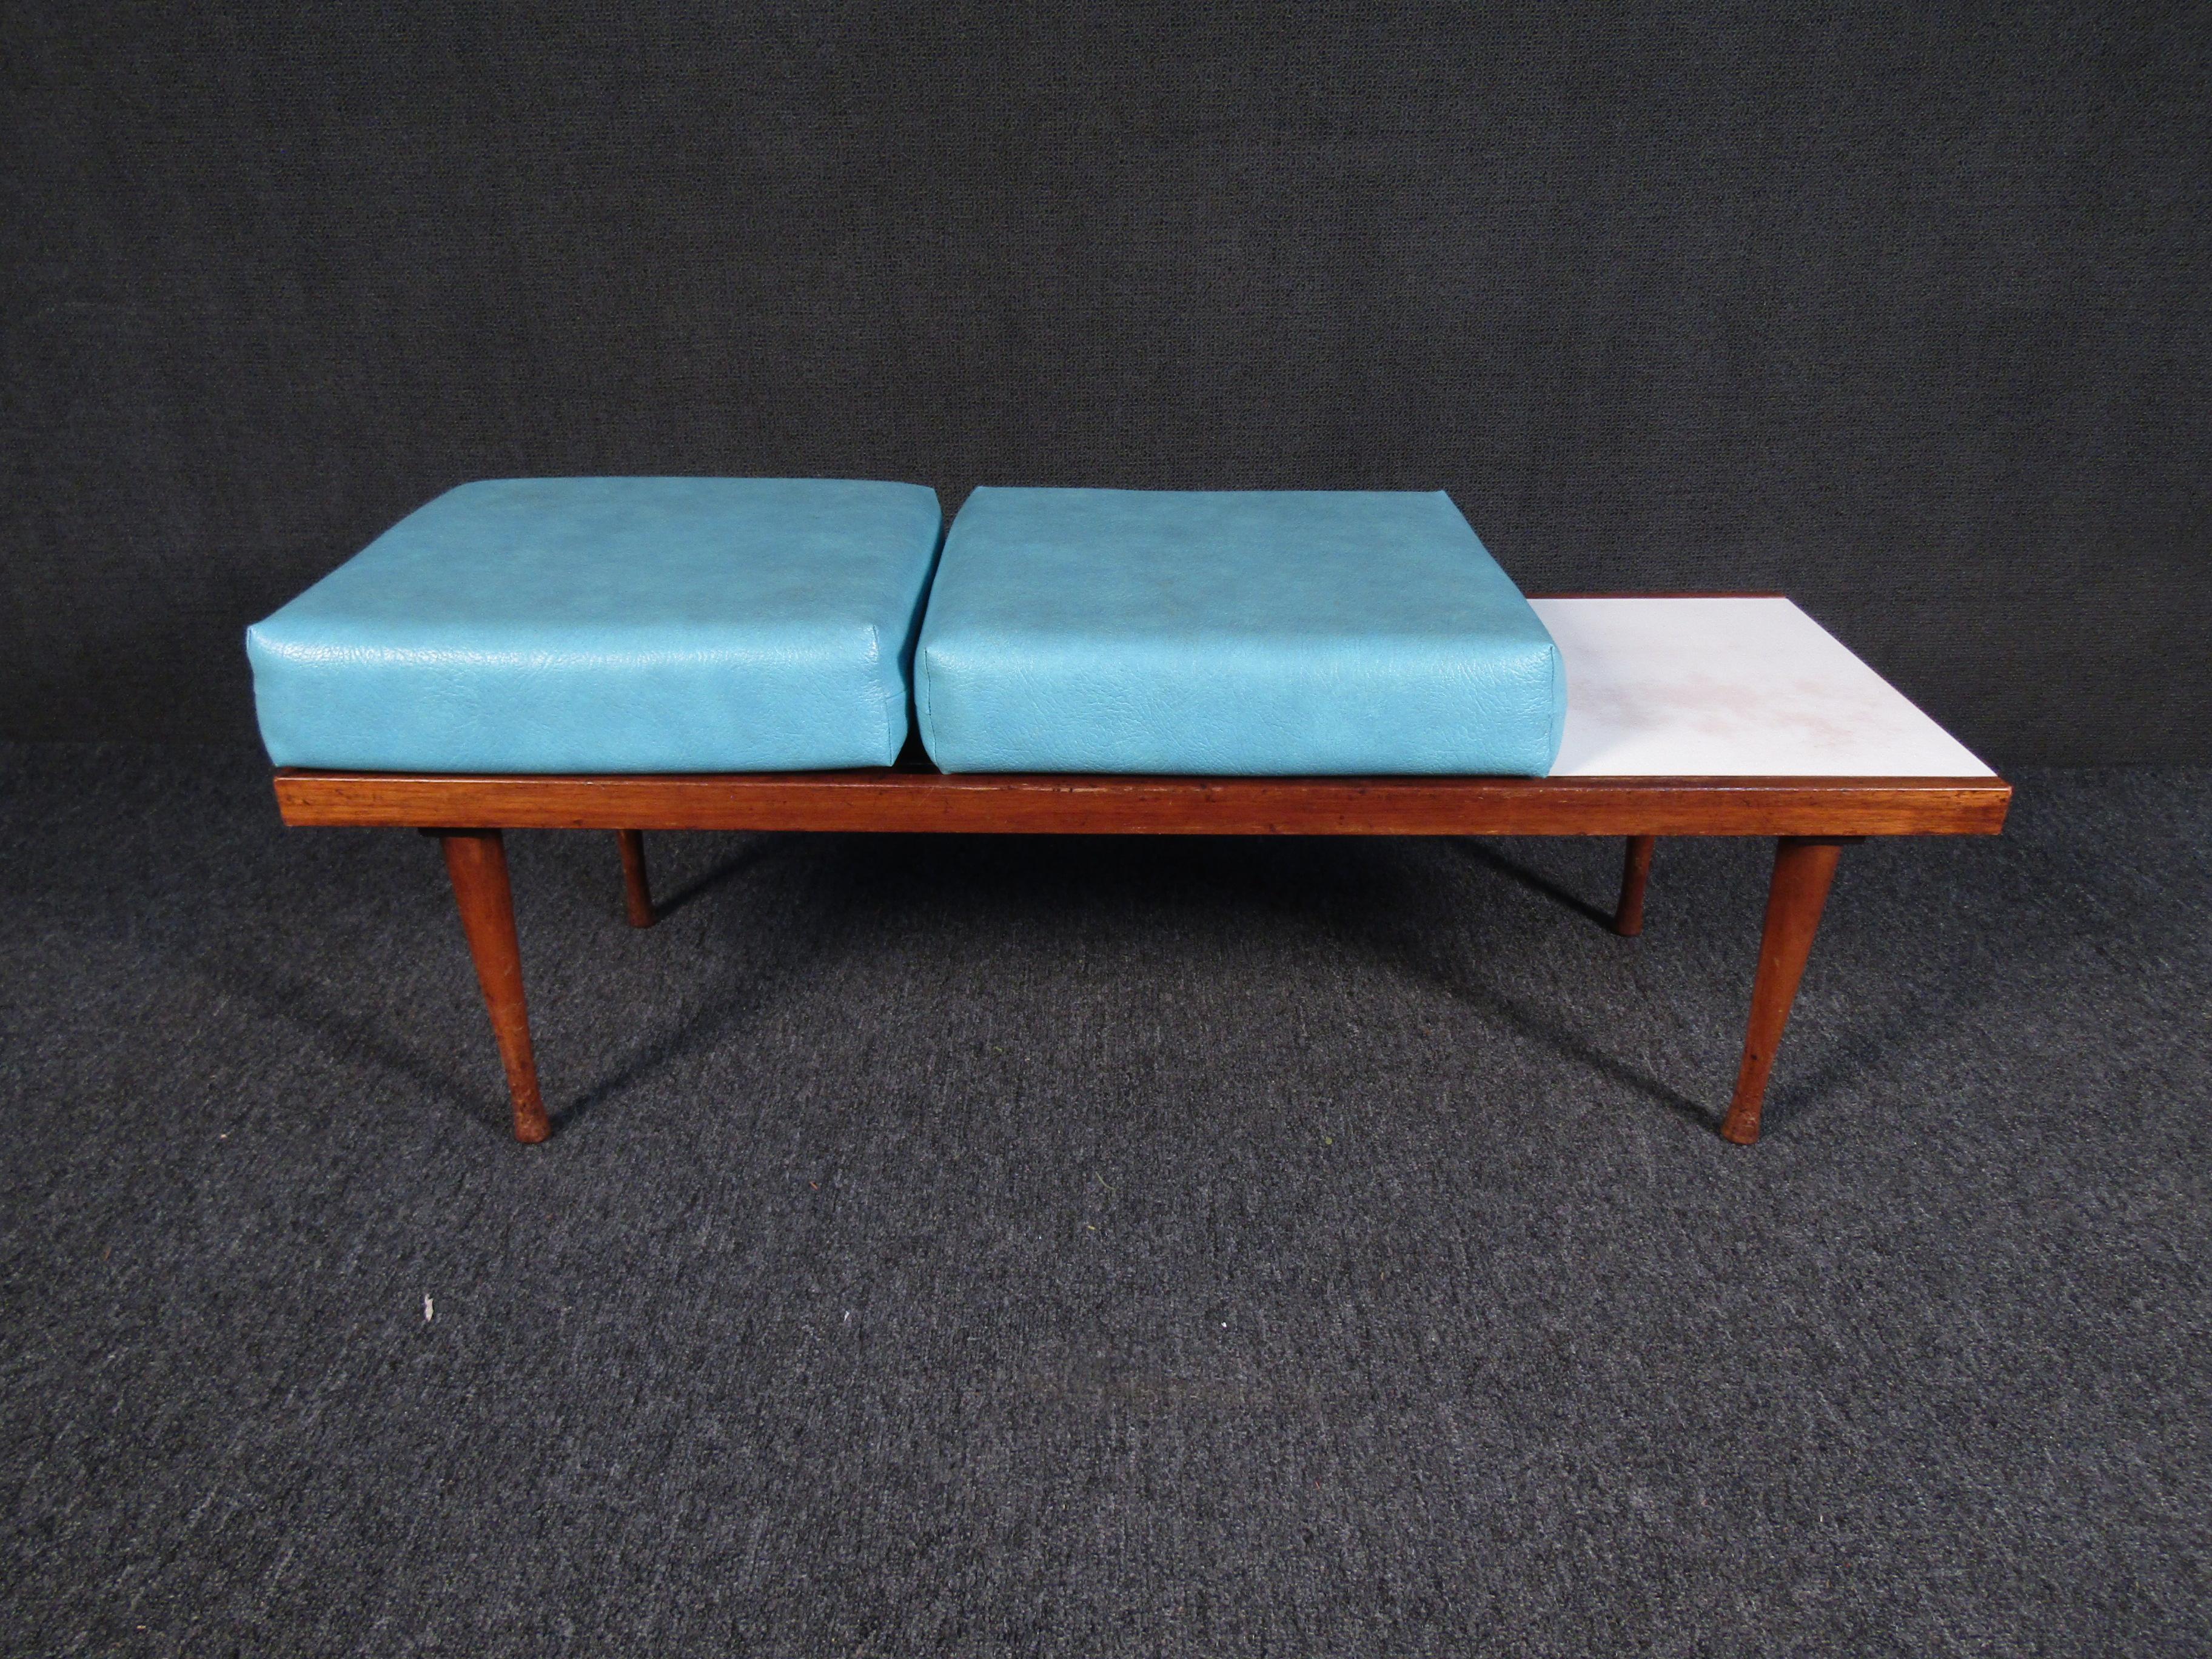 An interesting vintage bench combining sculpted walnut legs and a slatted top with cushions upholstered in a vibrant blue upholstery. One side of the bench also has a white cover to set items on. Please confirm item location with seller (NY/NJ).